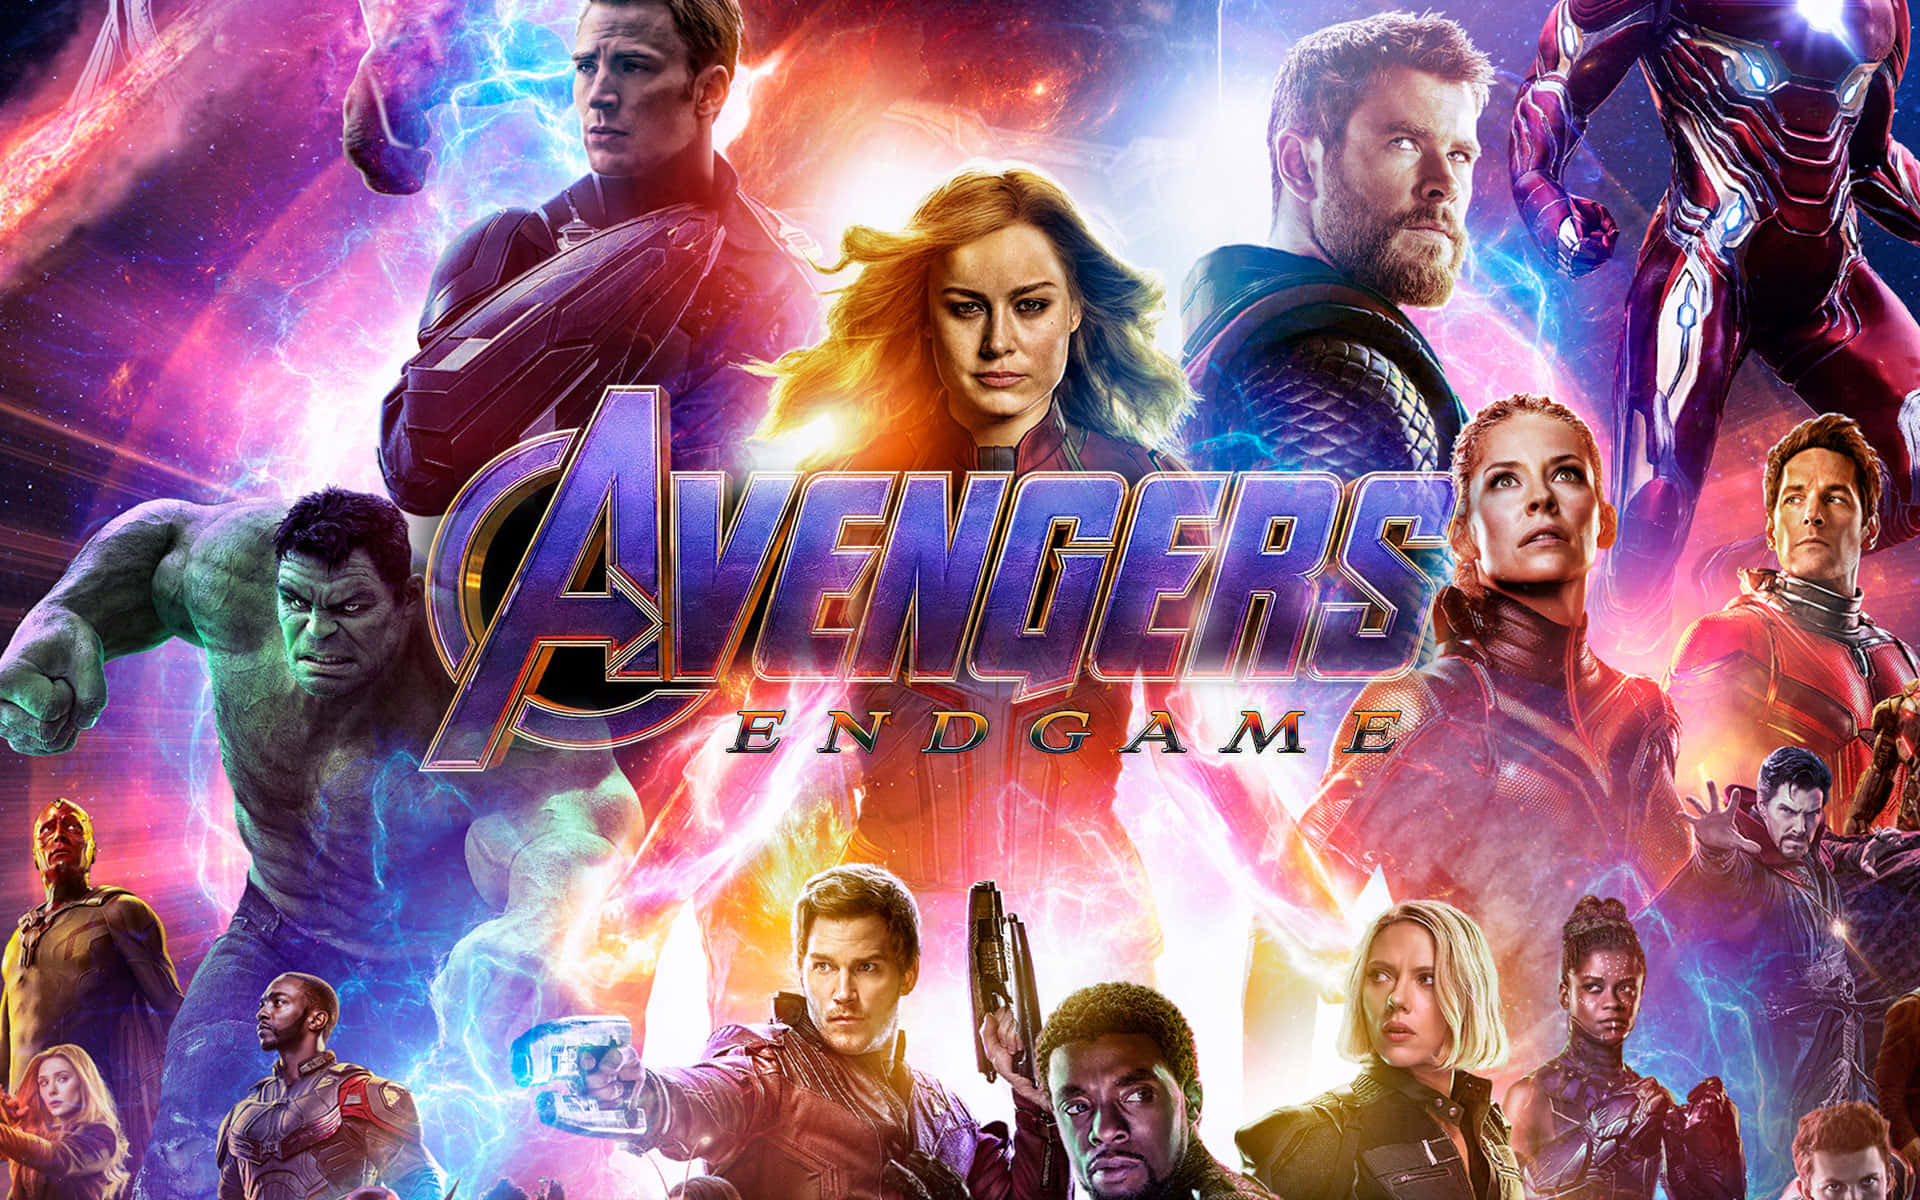 Experience The Future of The Avengers in Endgame